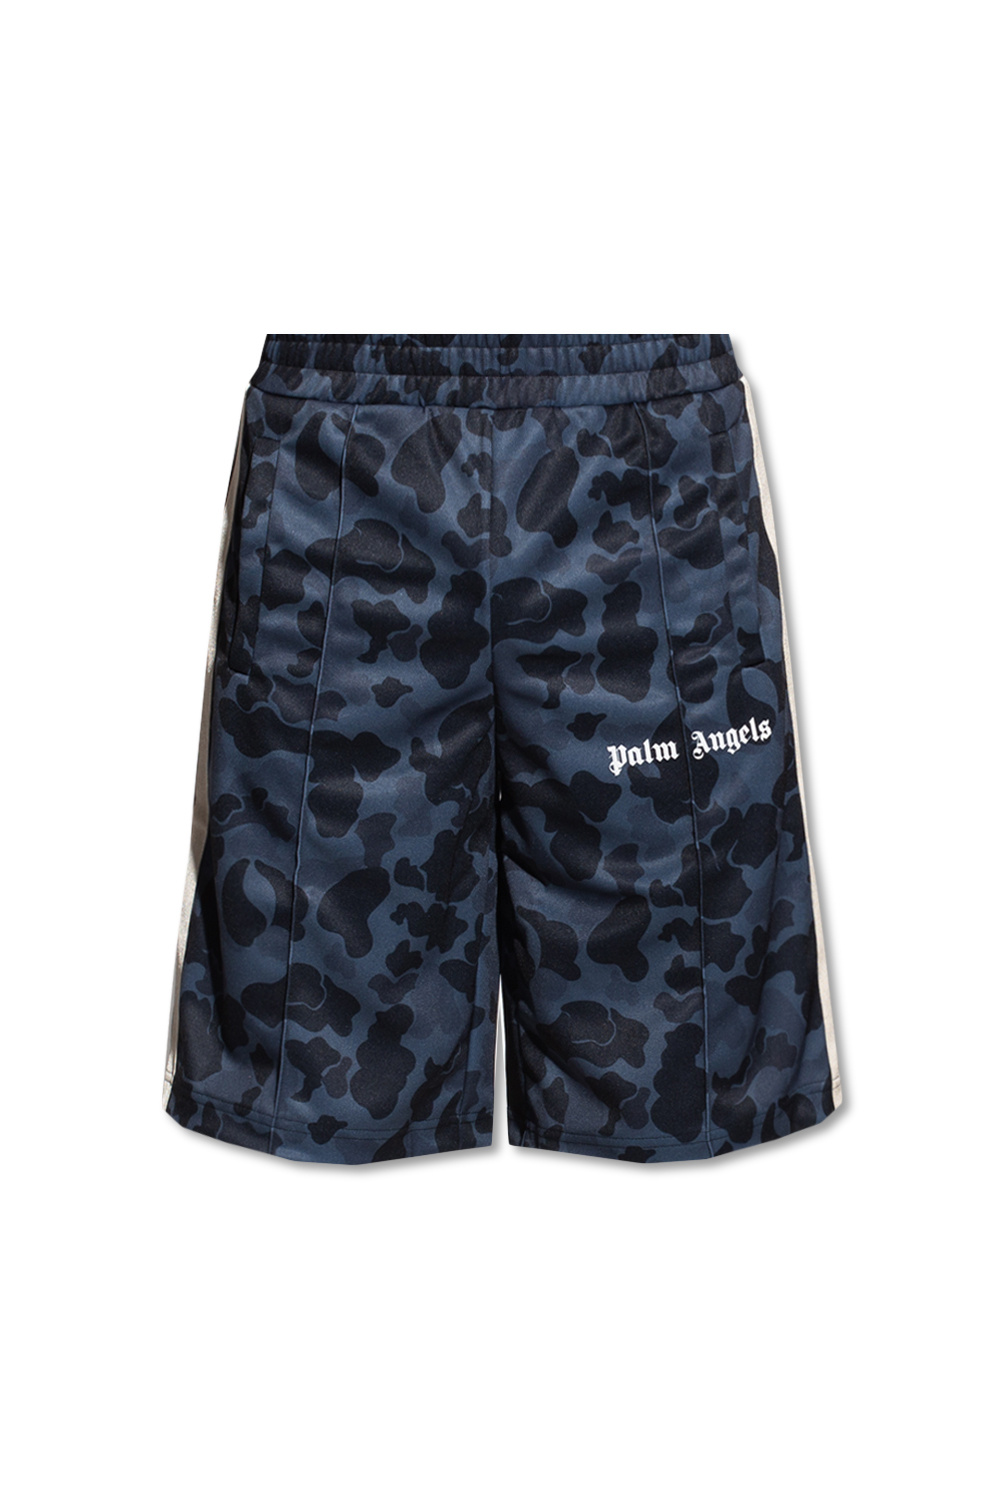 Palm Angels Shorts with logo